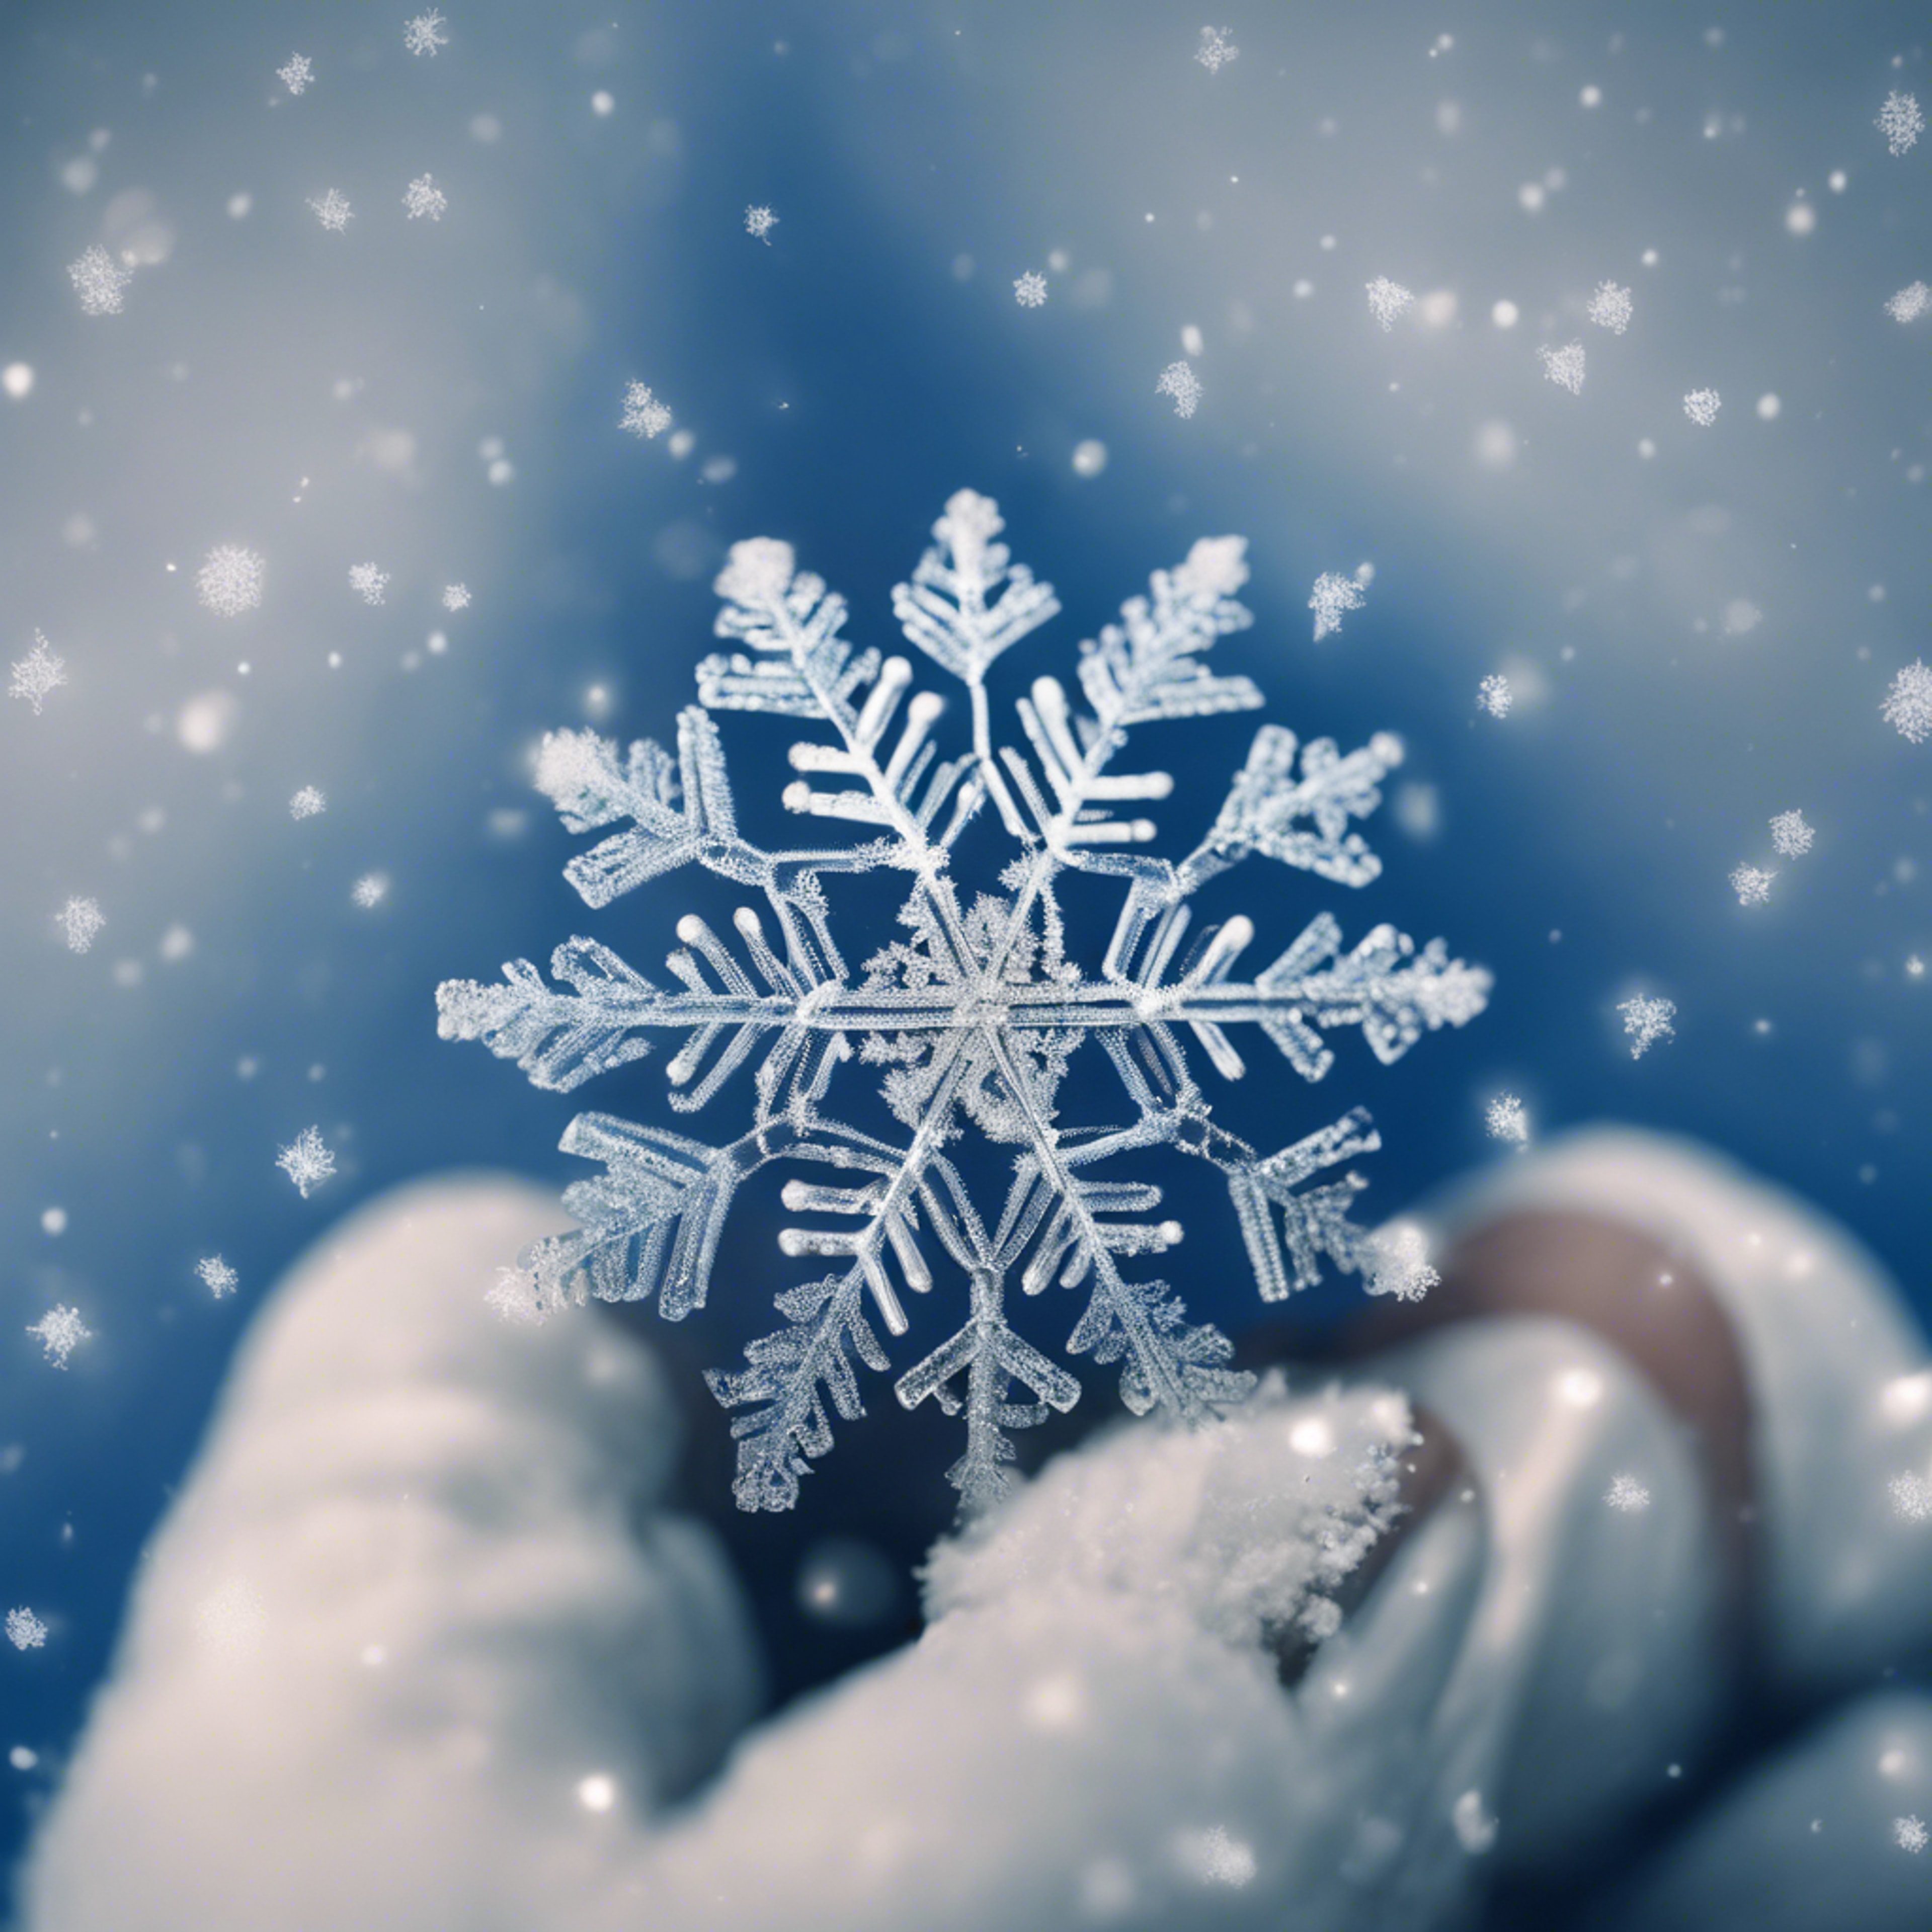 Intricate patterns of a snowflake on a blue gloved finger. 牆紙[6c7ed0f3c74b413e9833]